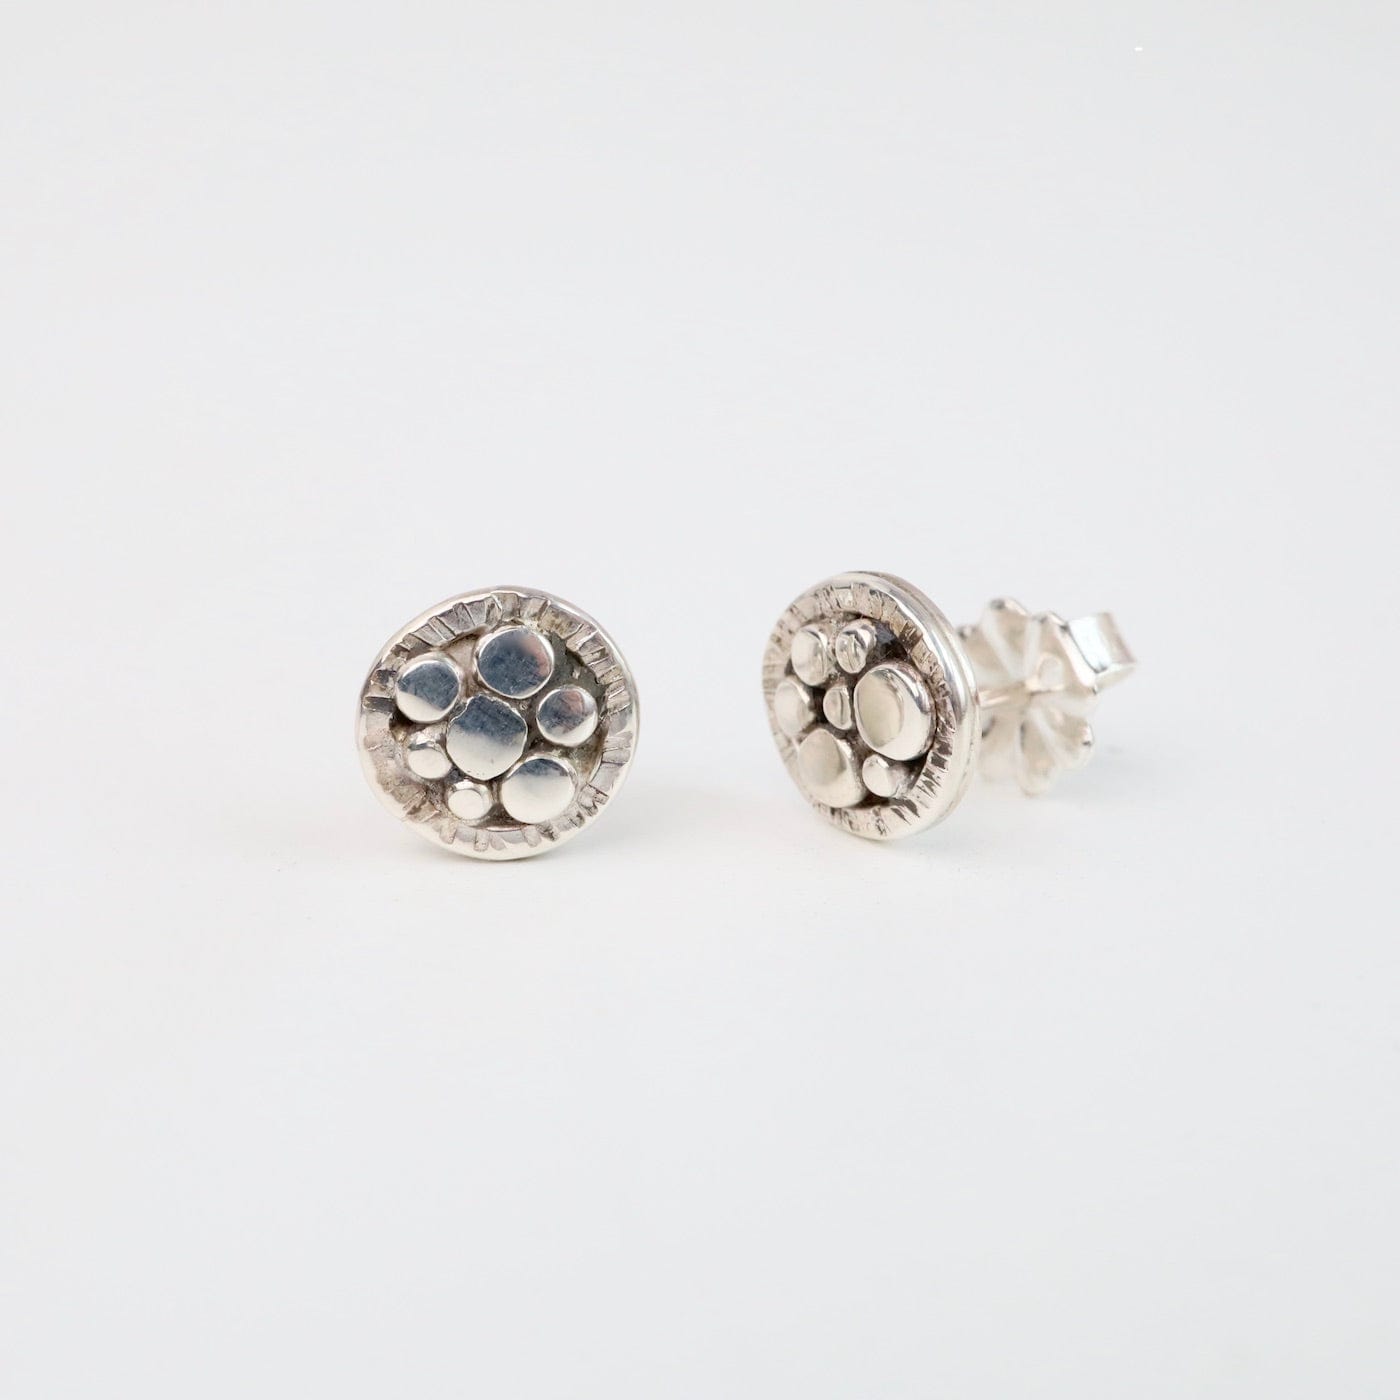 EAR Sterling Post Earrings with Textured Lines & Flat Balls